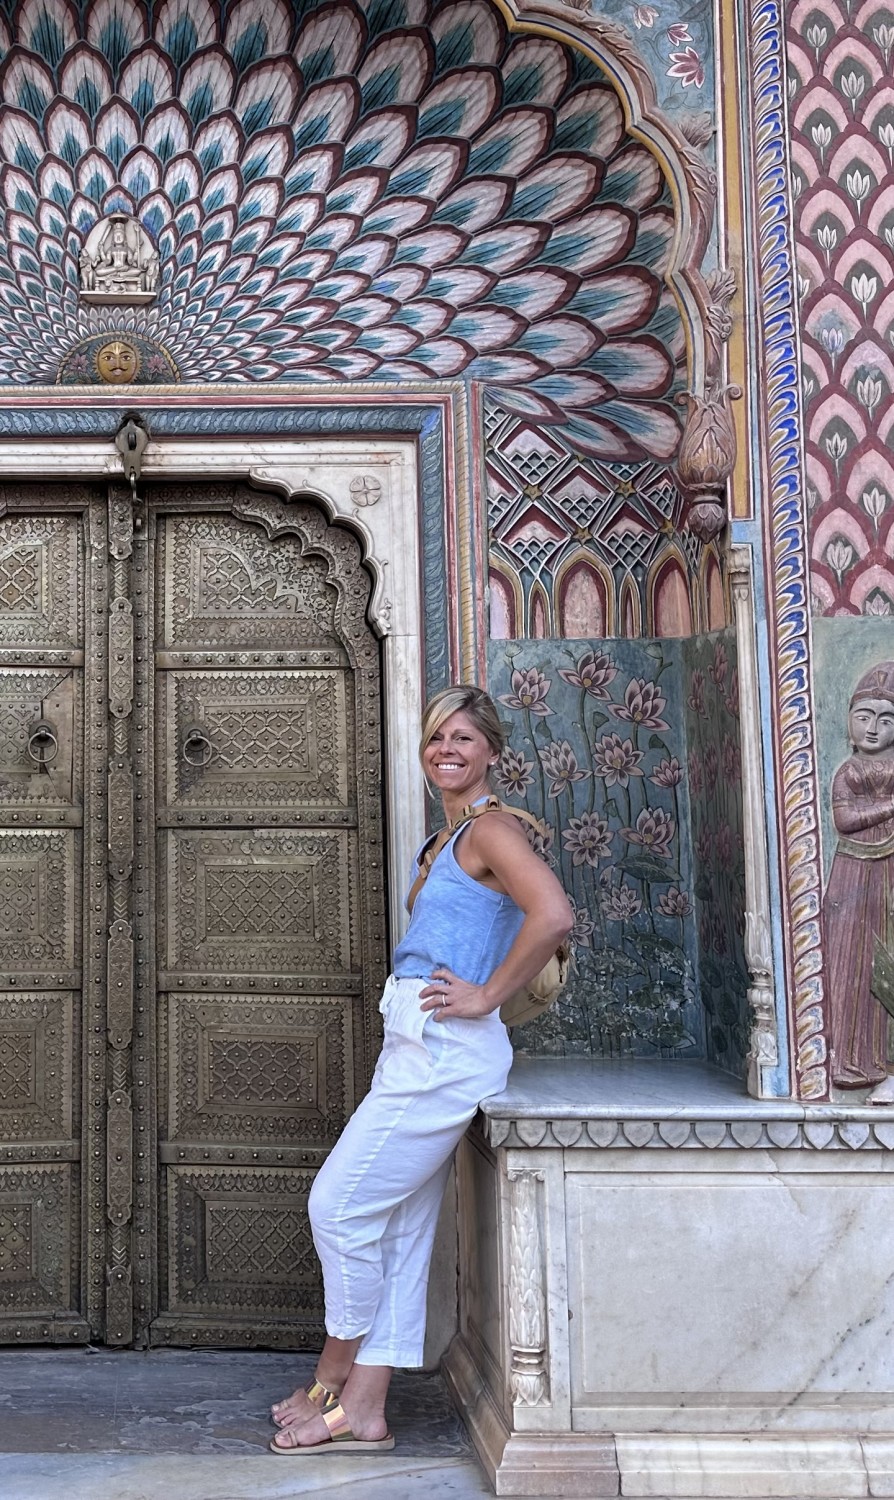 a blonde woman wearing blue pants anf a blue shirt stands in front of an ornate door and a colorful archway